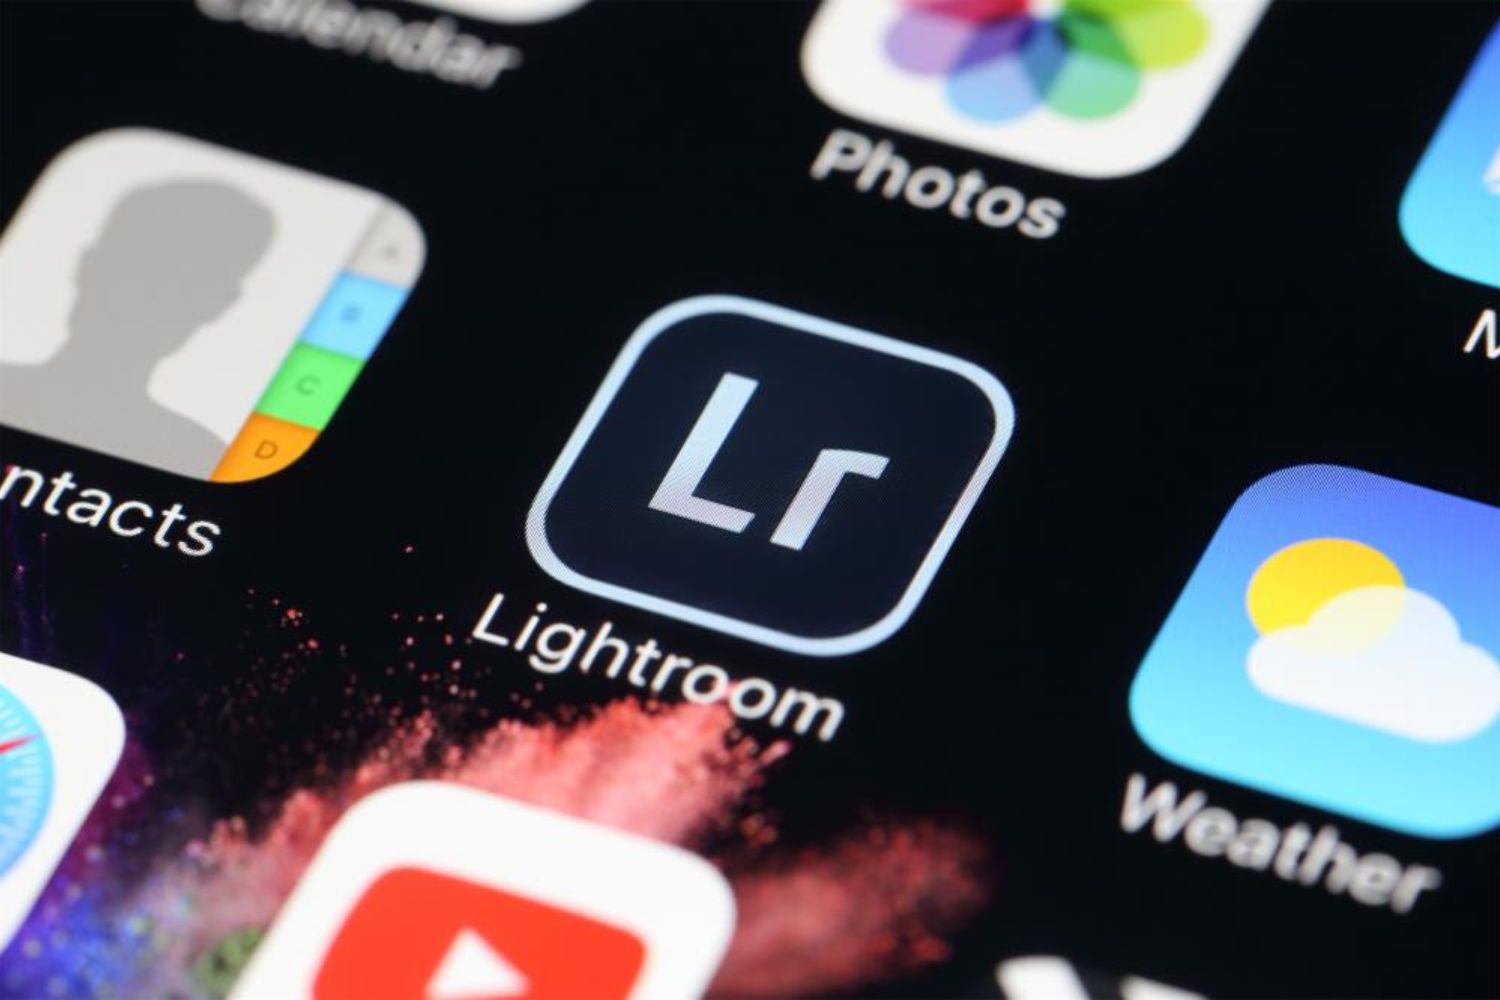 Lightroom APP icon Photo by charnsitr on shutterstock